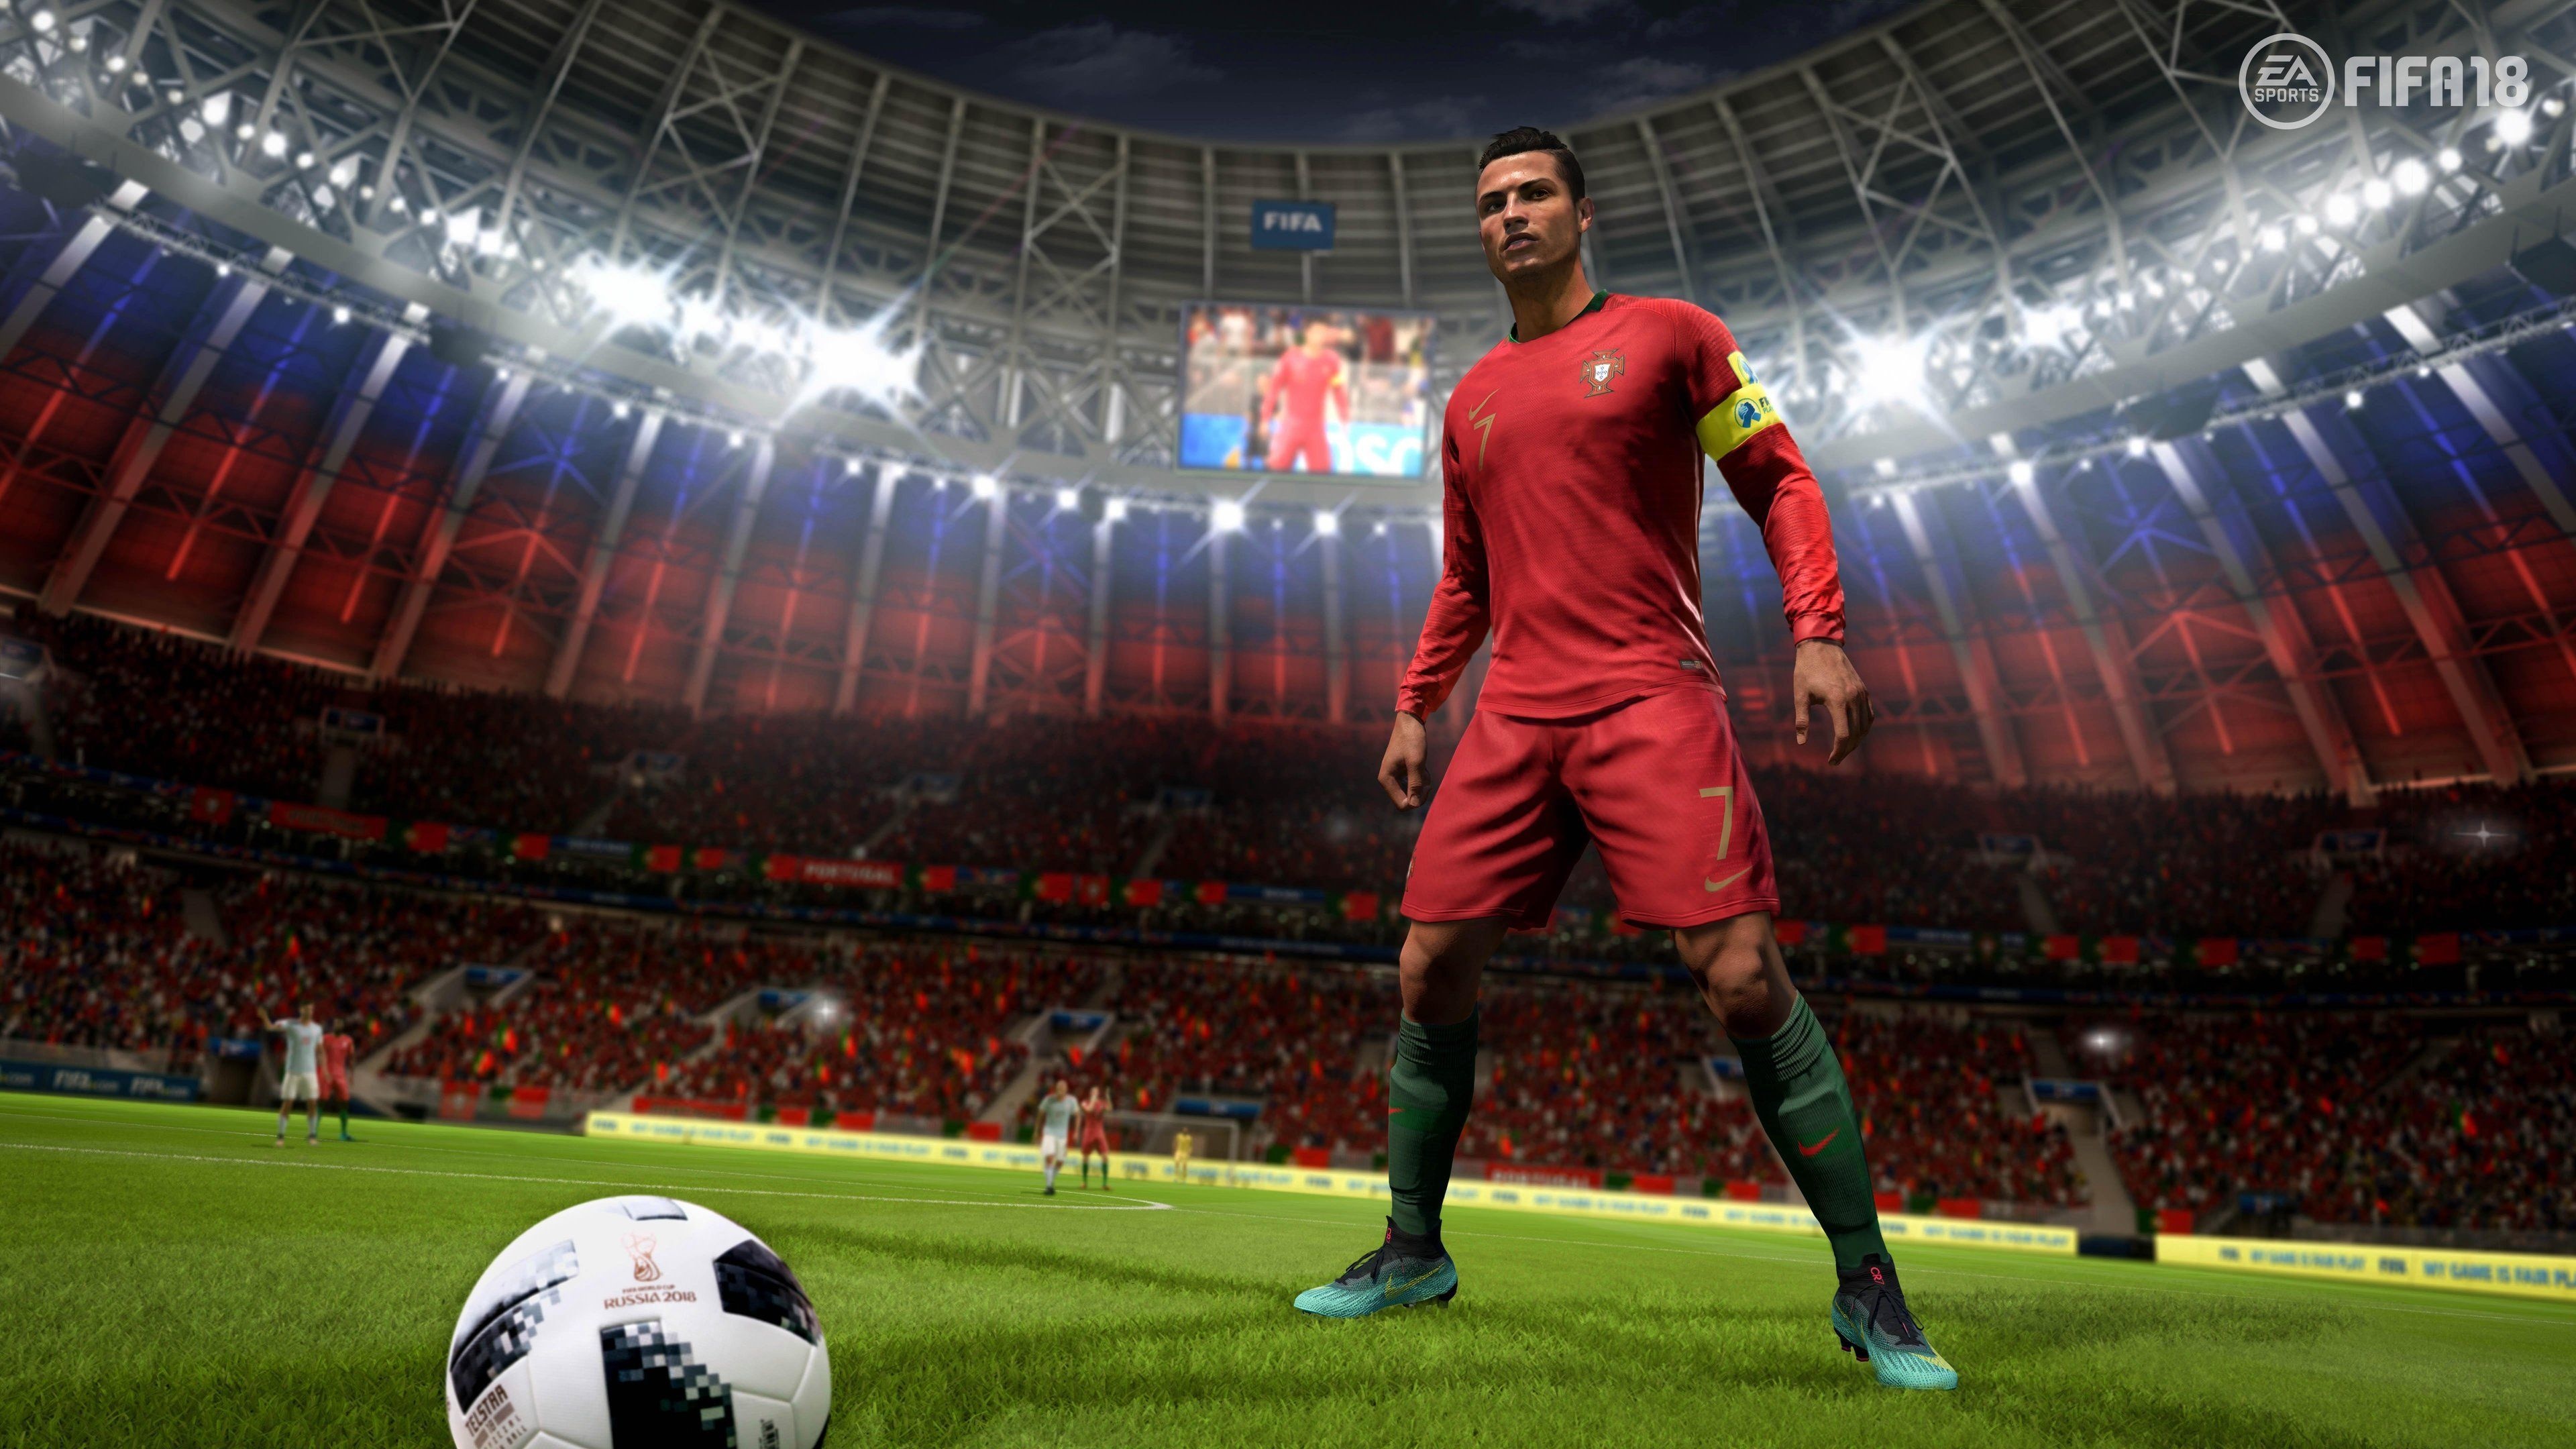 FIFA Soccer (Game): Produced by EA Sports for over 20 years, Gaming. 3840x2160 4K Background.